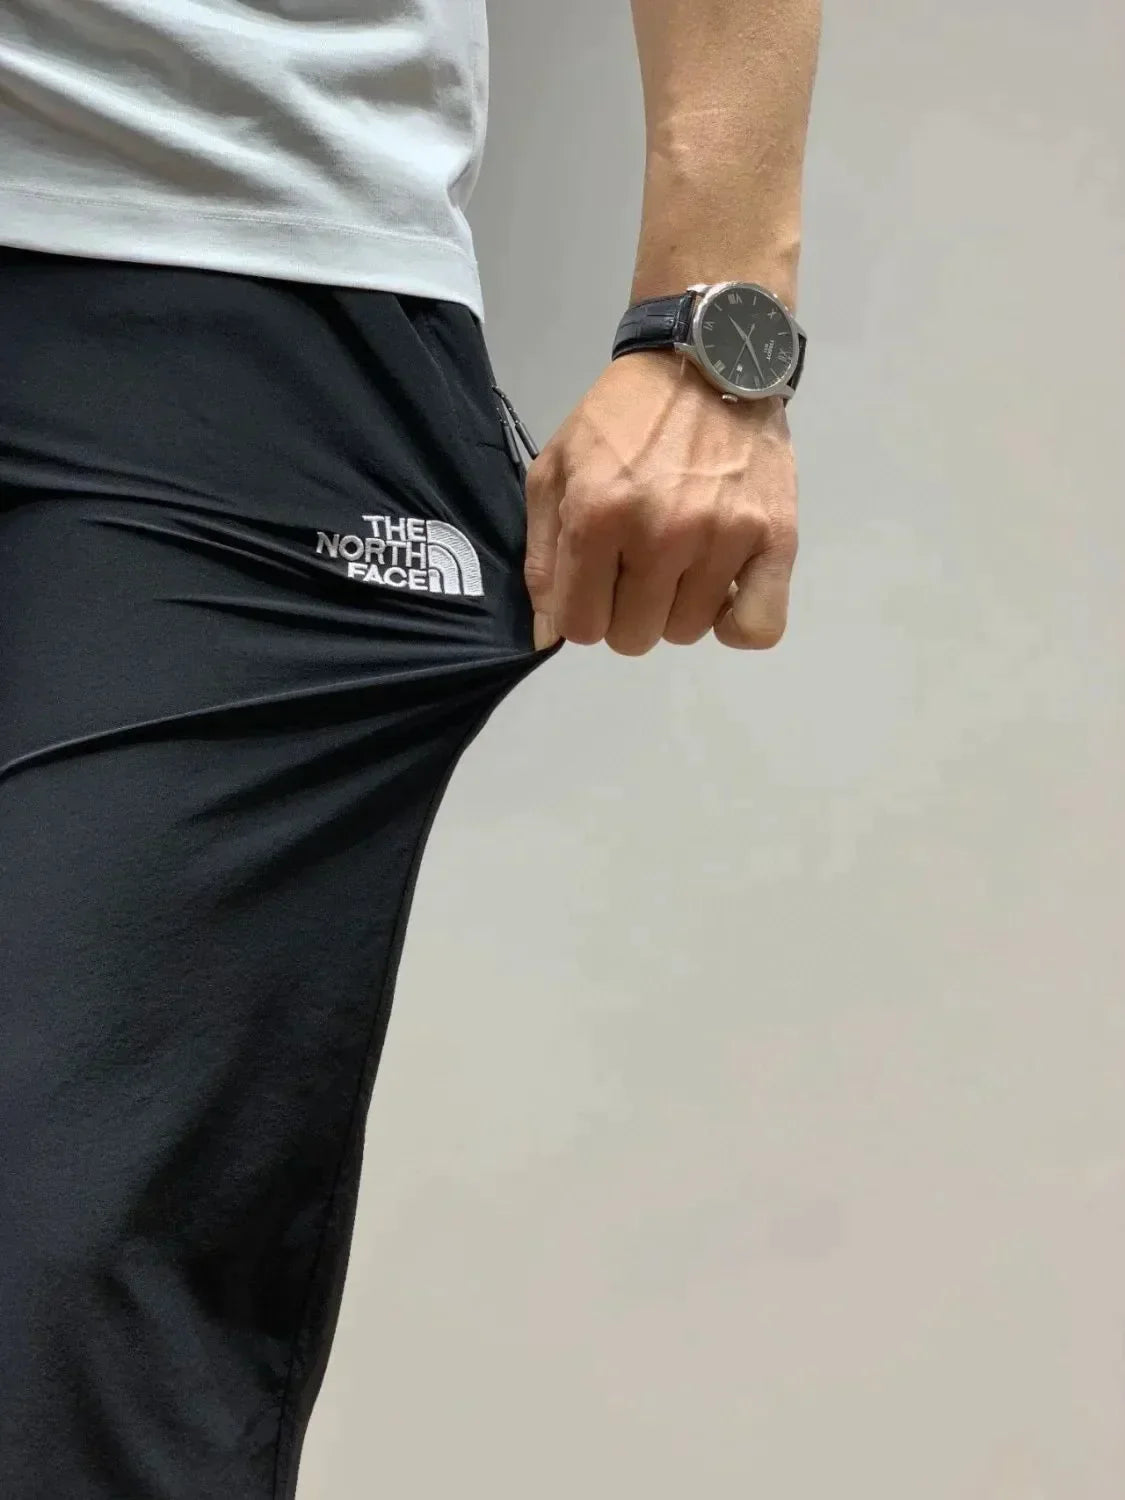 Ultra-fast-drying, ultra-stretchy unisex pants